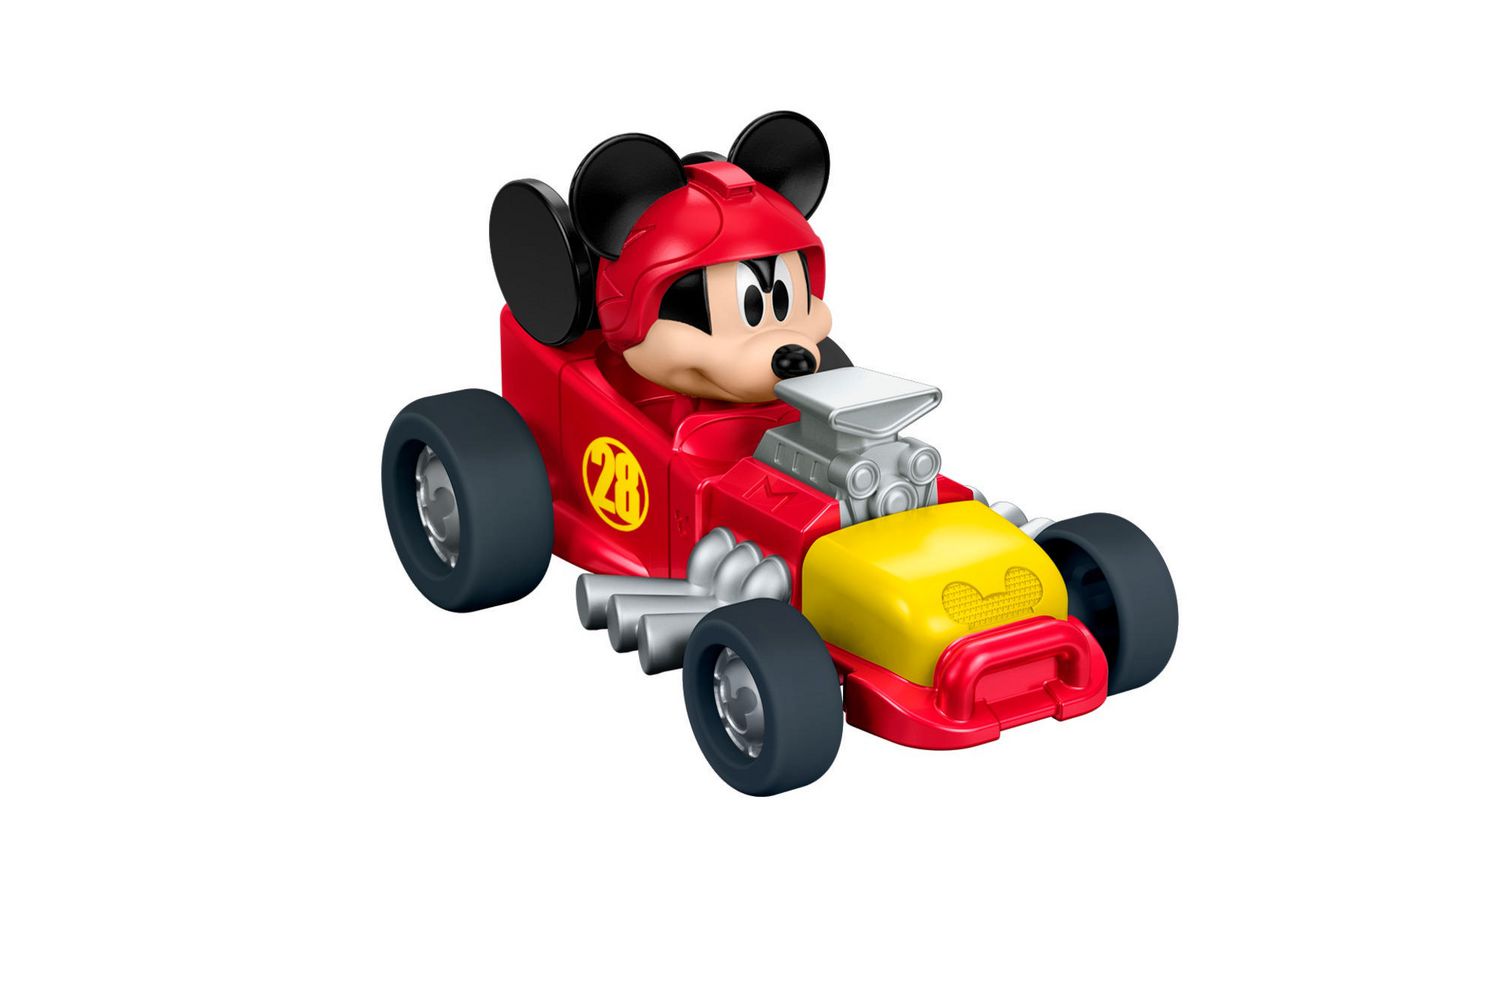 fisher price disney mickey and the roadster racers